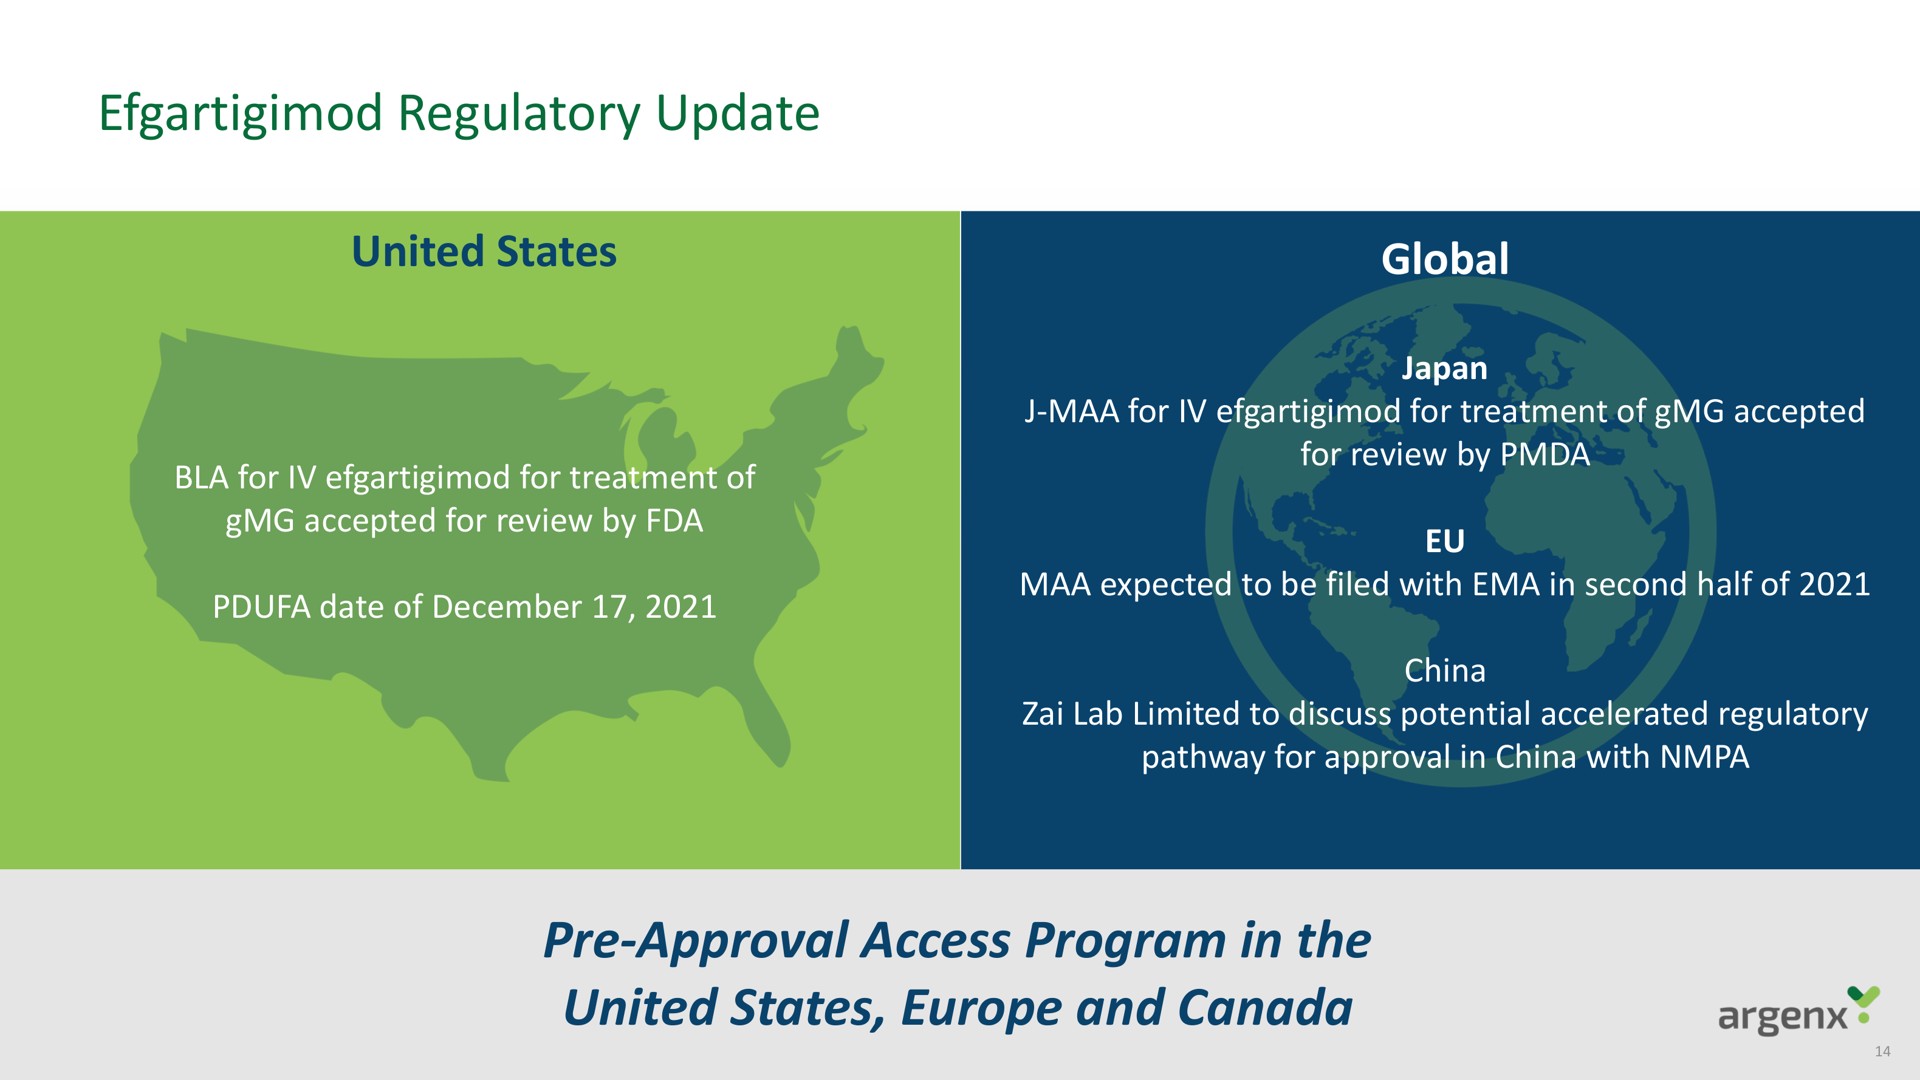 regulatory update approval access program in the united states and canada | argenx SE